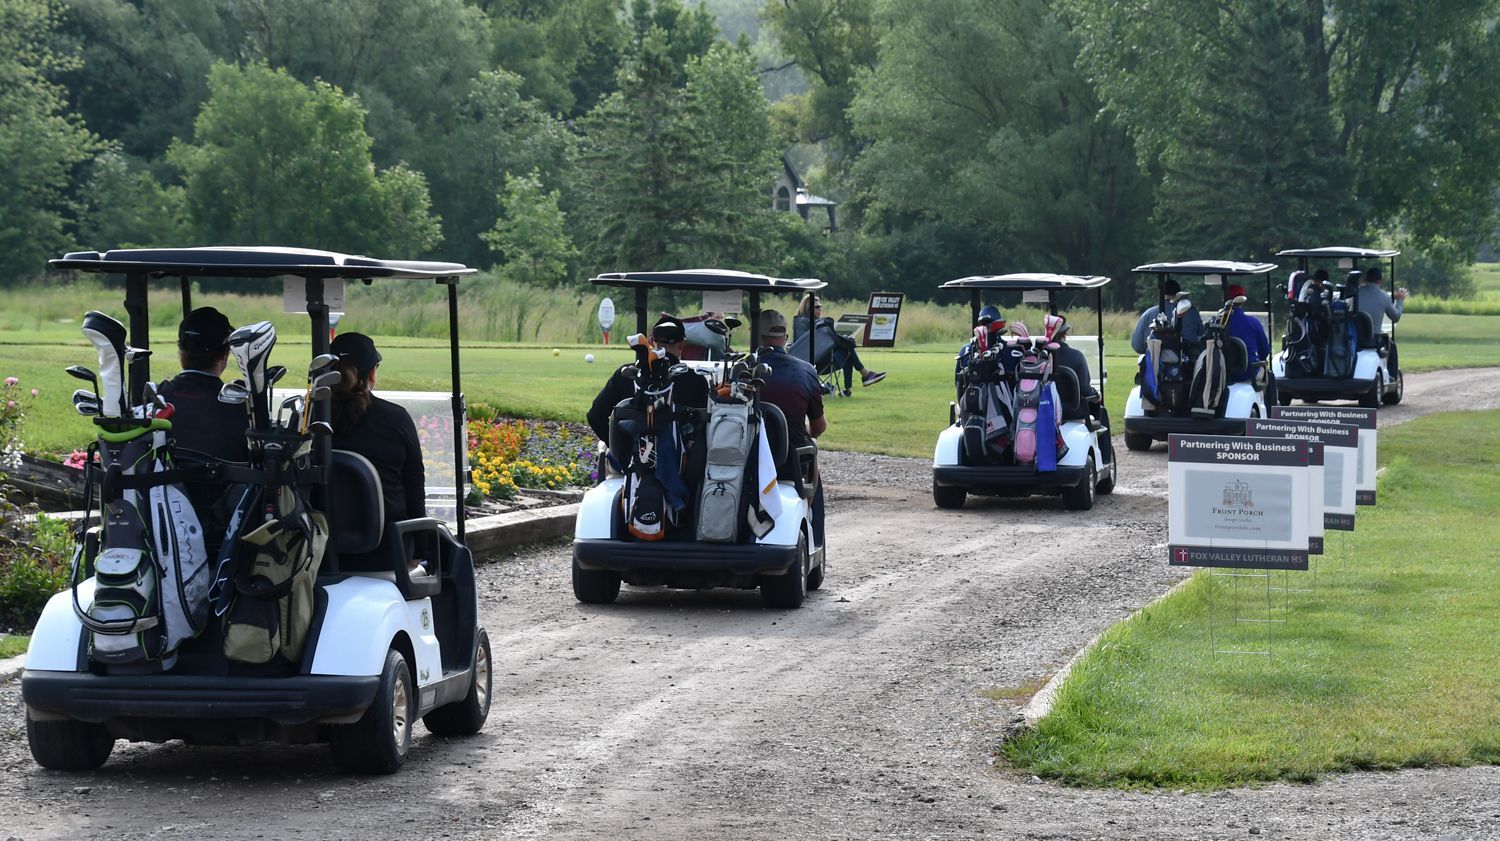 Five golf carts on the way to their holes